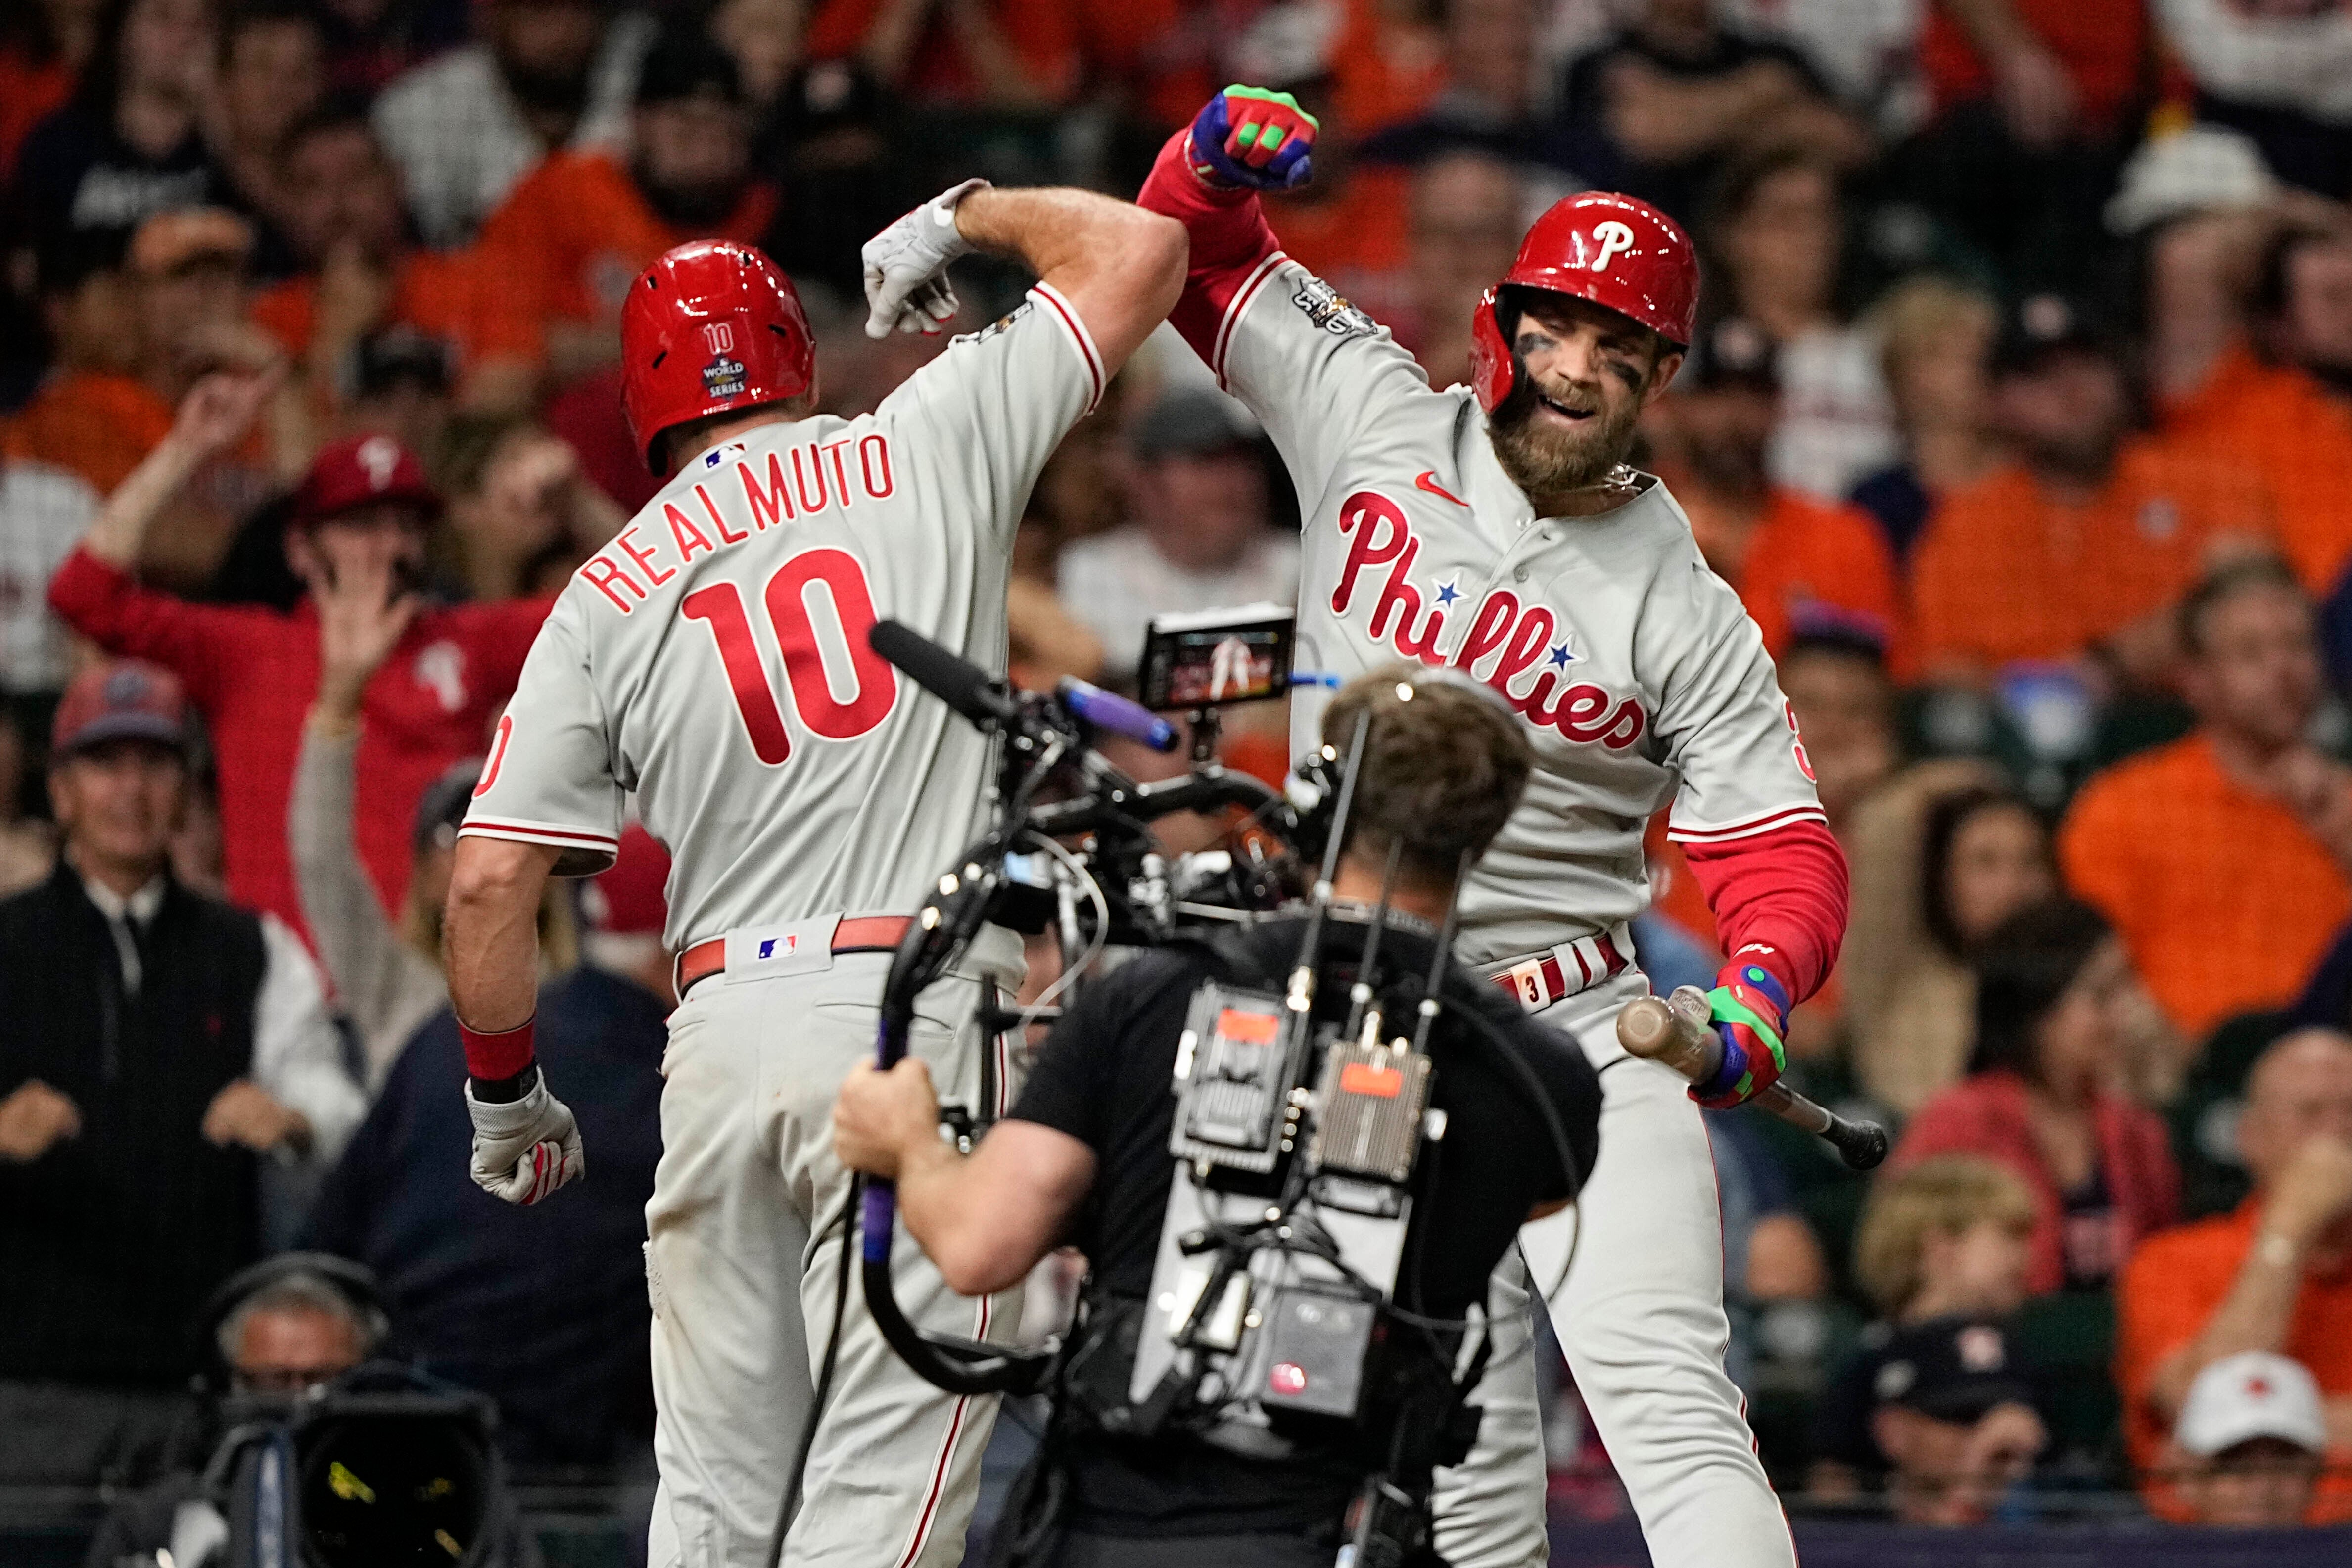 Phillies World Series opener most viewed on TV since 2019